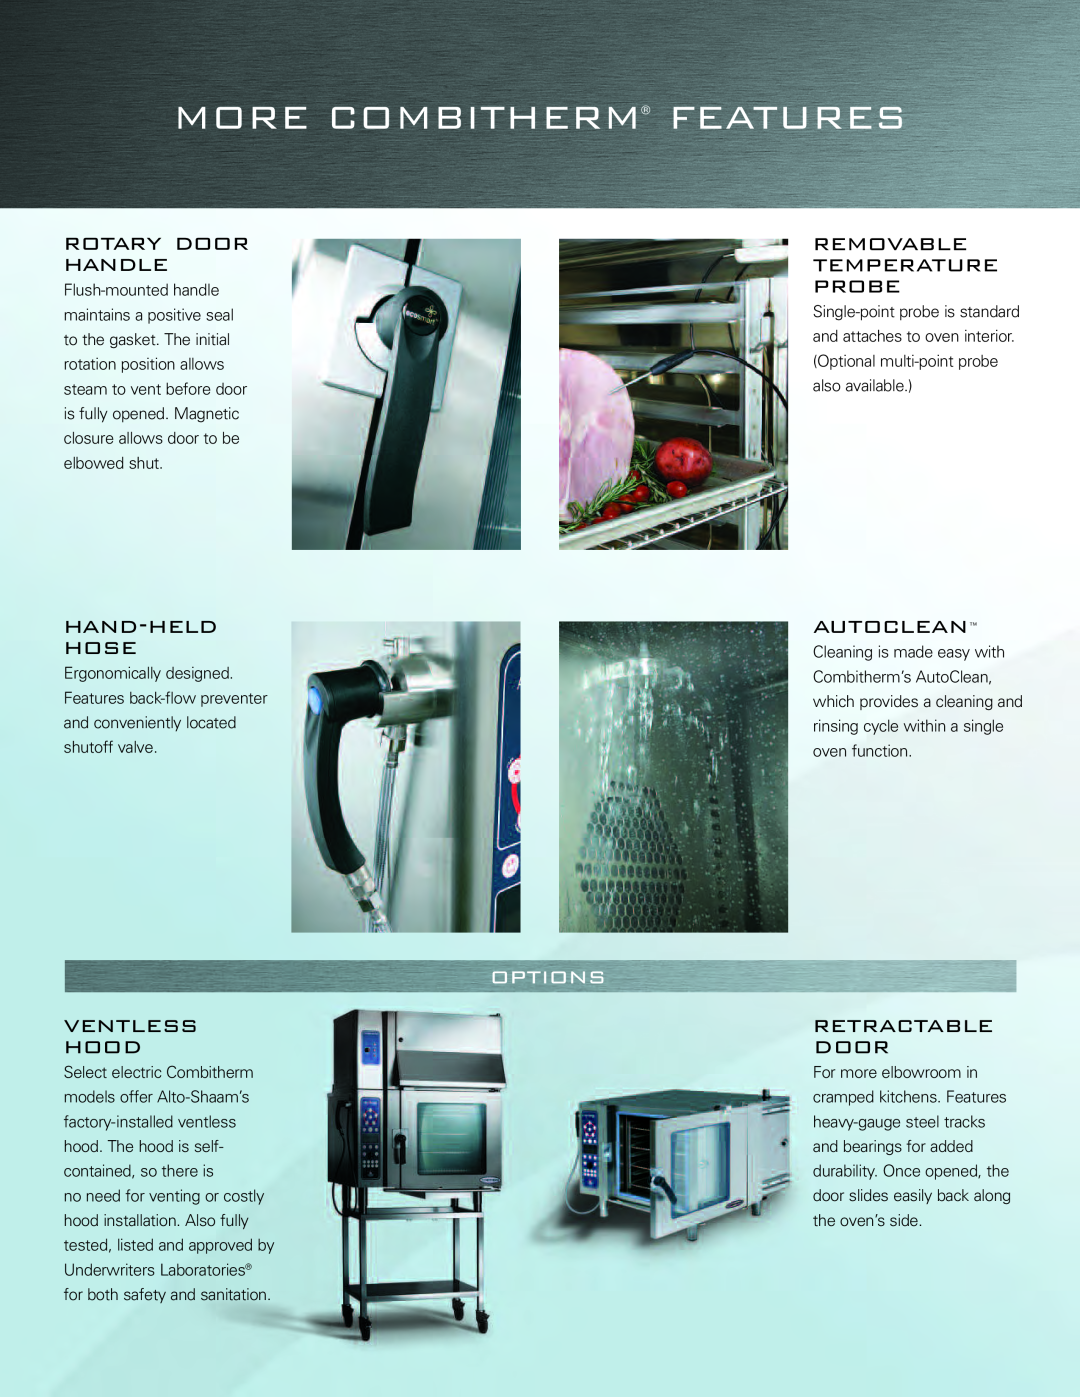 Alto-Shaam Combi Oven More Combitherm Features, options, rotary door handle, removable temperature probe, hand-heldhose 